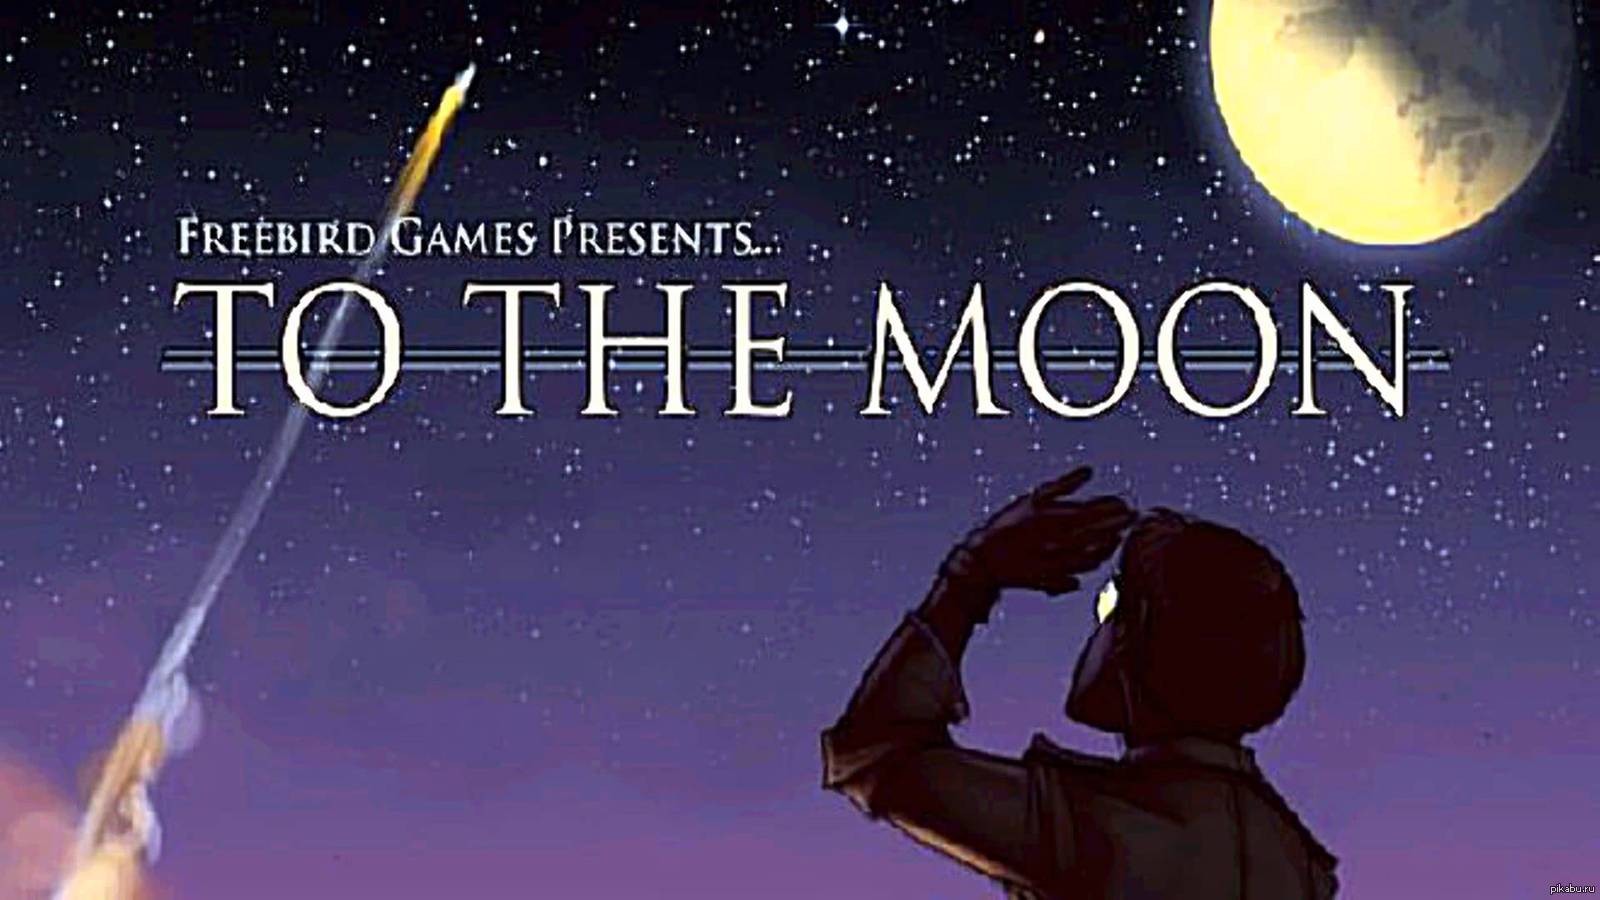 The moon travels. To the Moon. The Moon игра. To the Moon game. To the Moon арты.